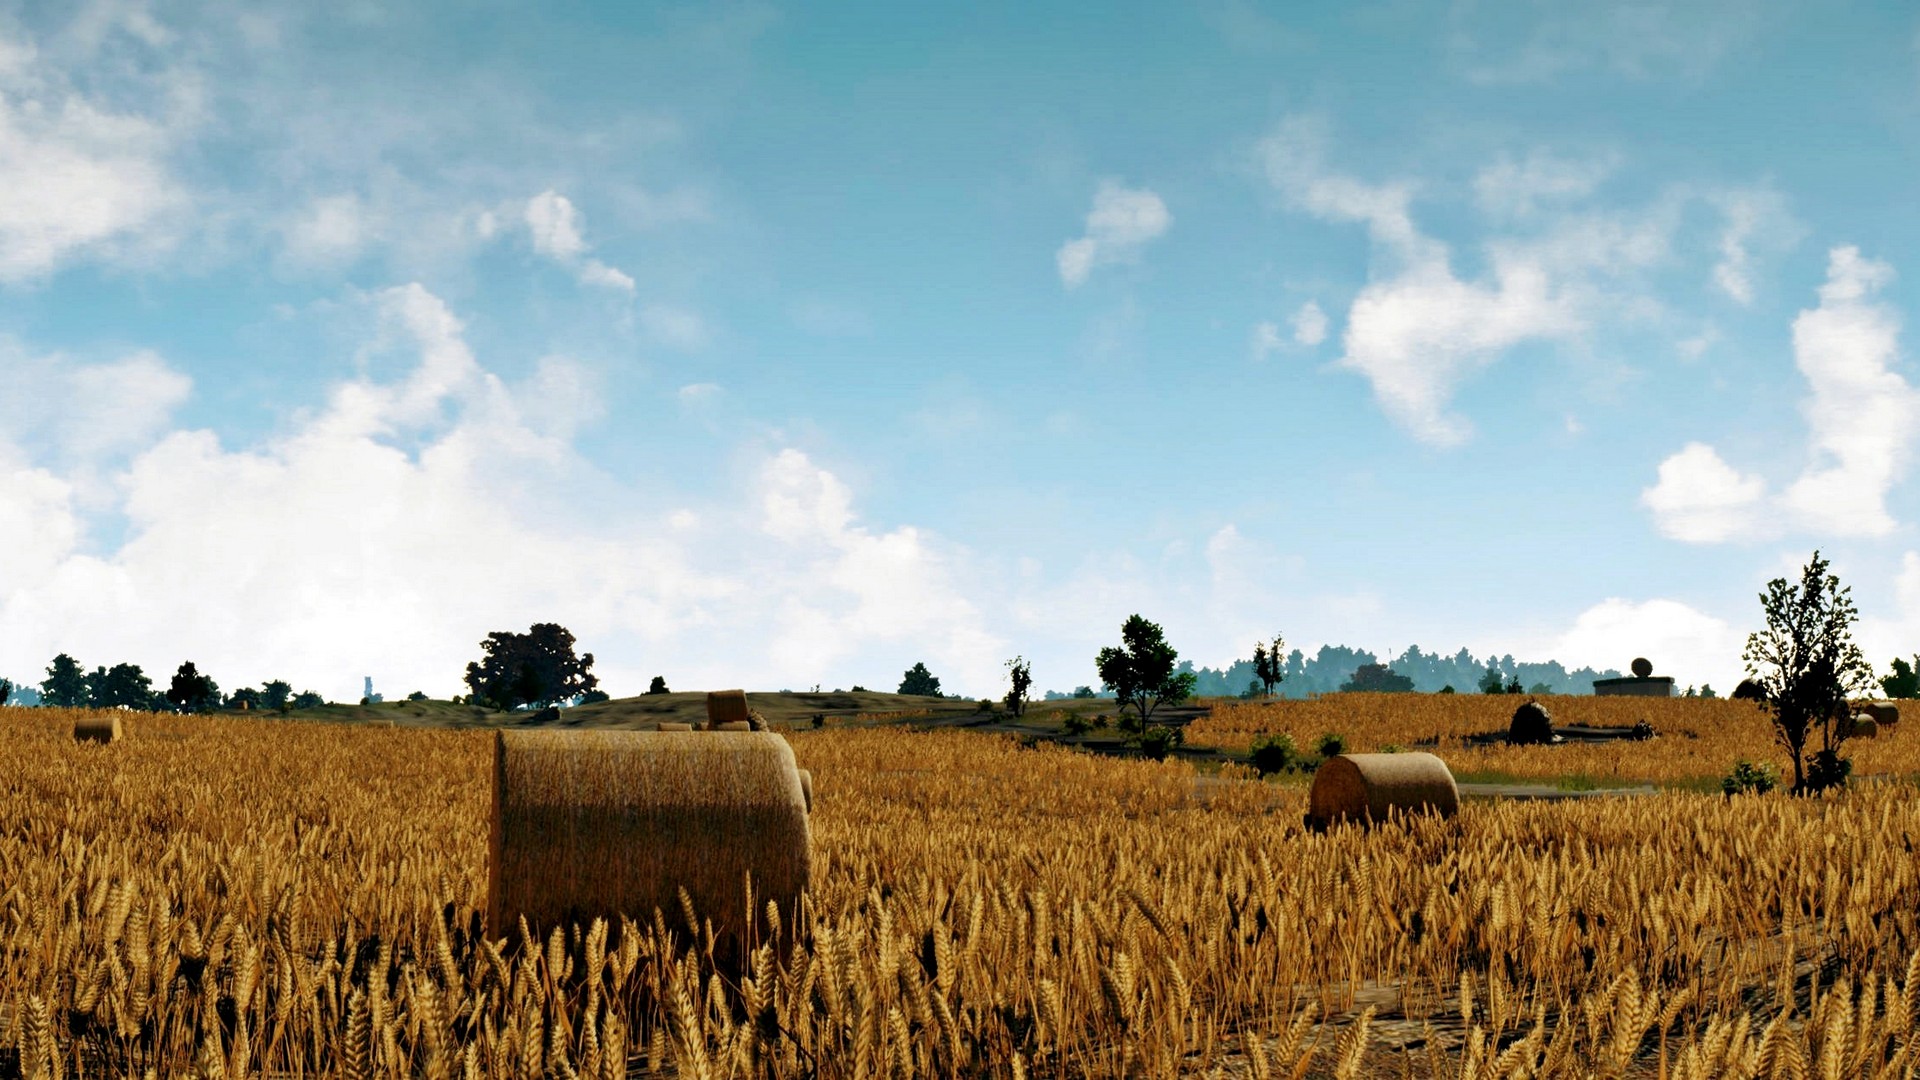 Wallpaper PUBG PC Desktop with resolution 1920X1080 pixel. You can use this wallpaper as background for your desktop Computer Screensavers, Android or iPhone smartphones